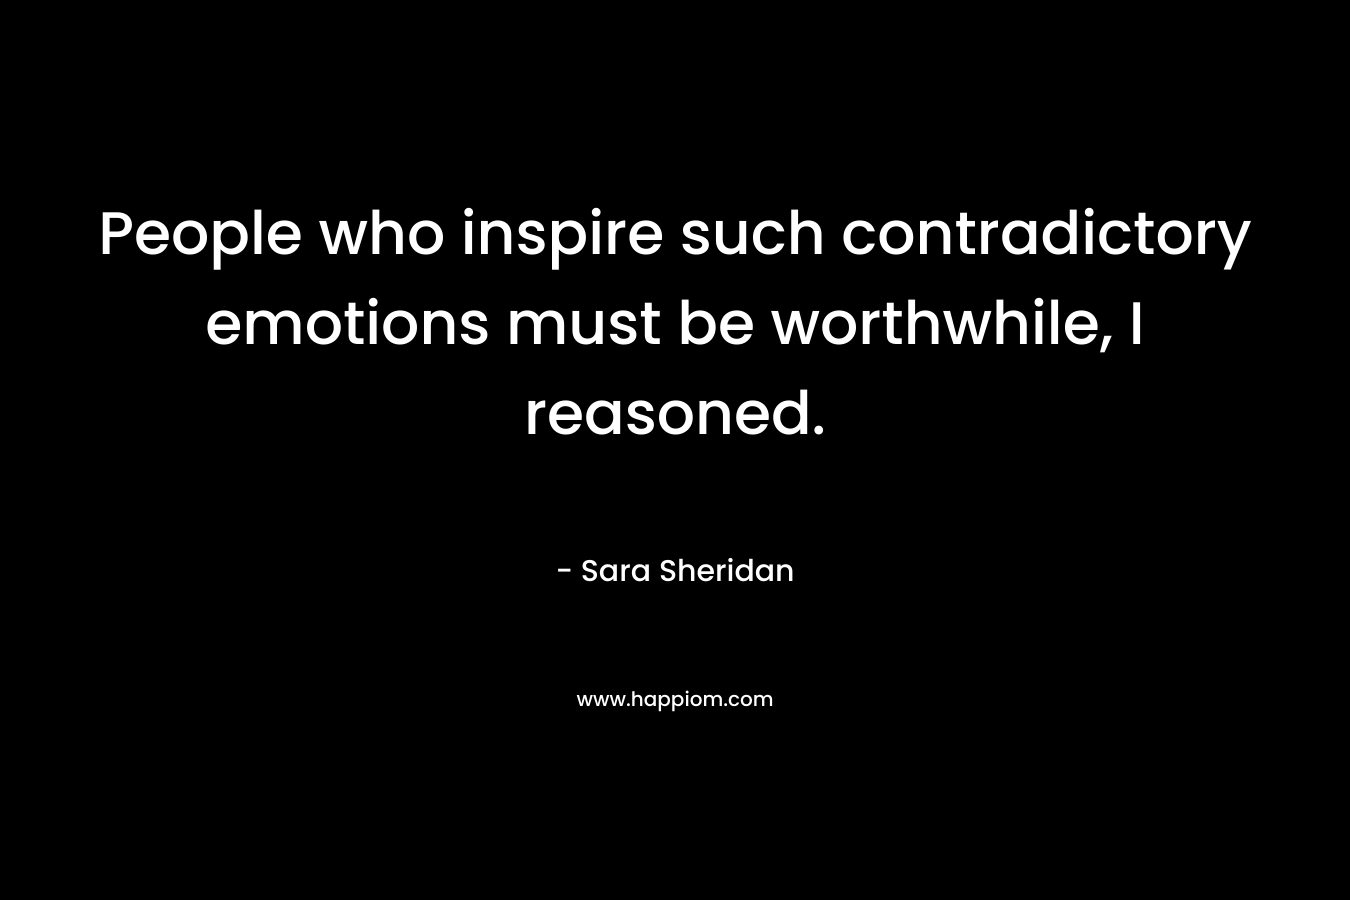 People who inspire such contradictory emotions must be worthwhile, I reasoned. – Sara Sheridan